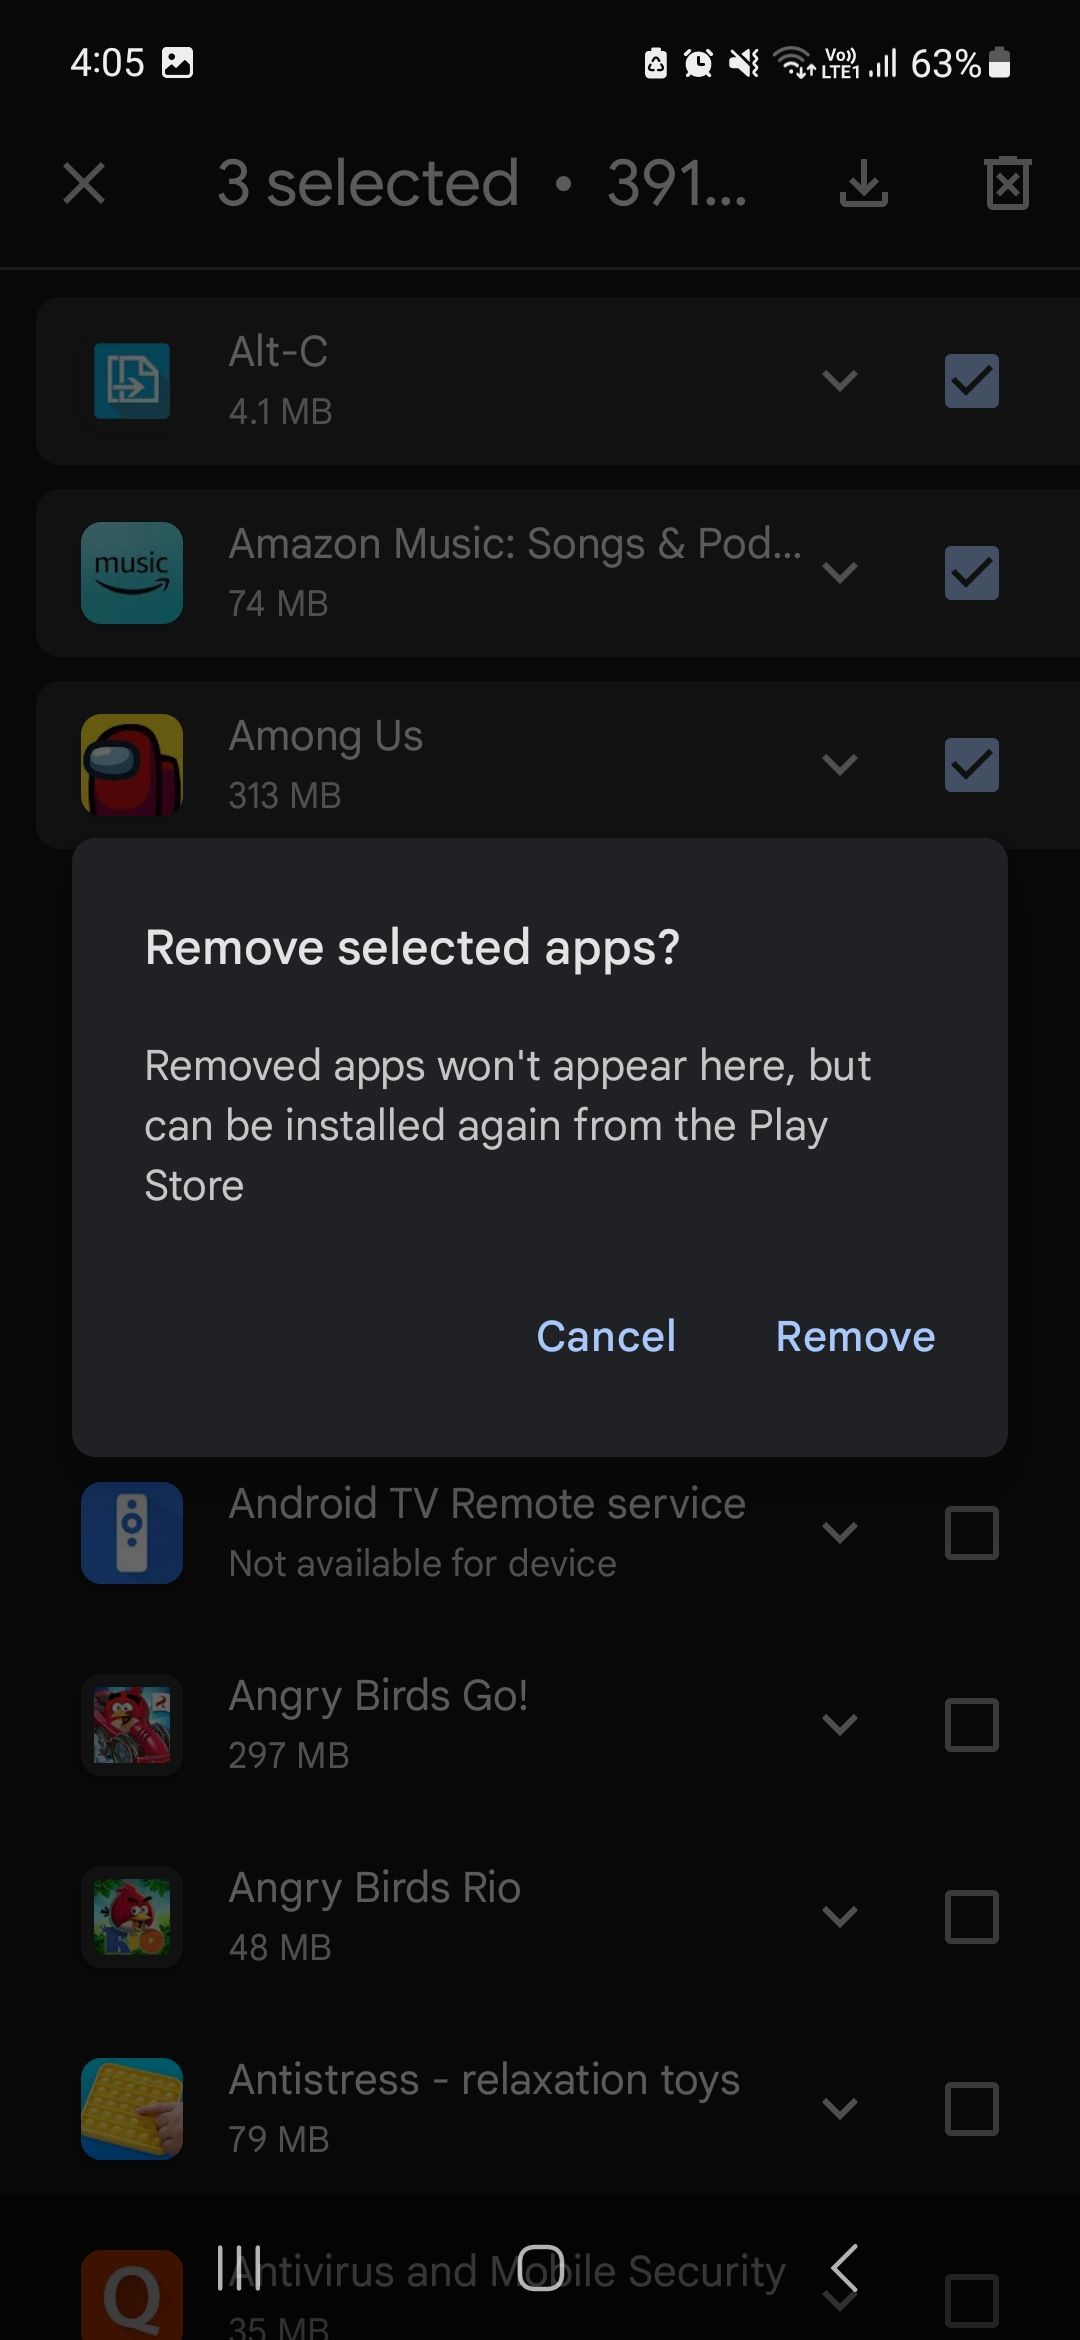 Confirm deleting Google Play Store app download history.